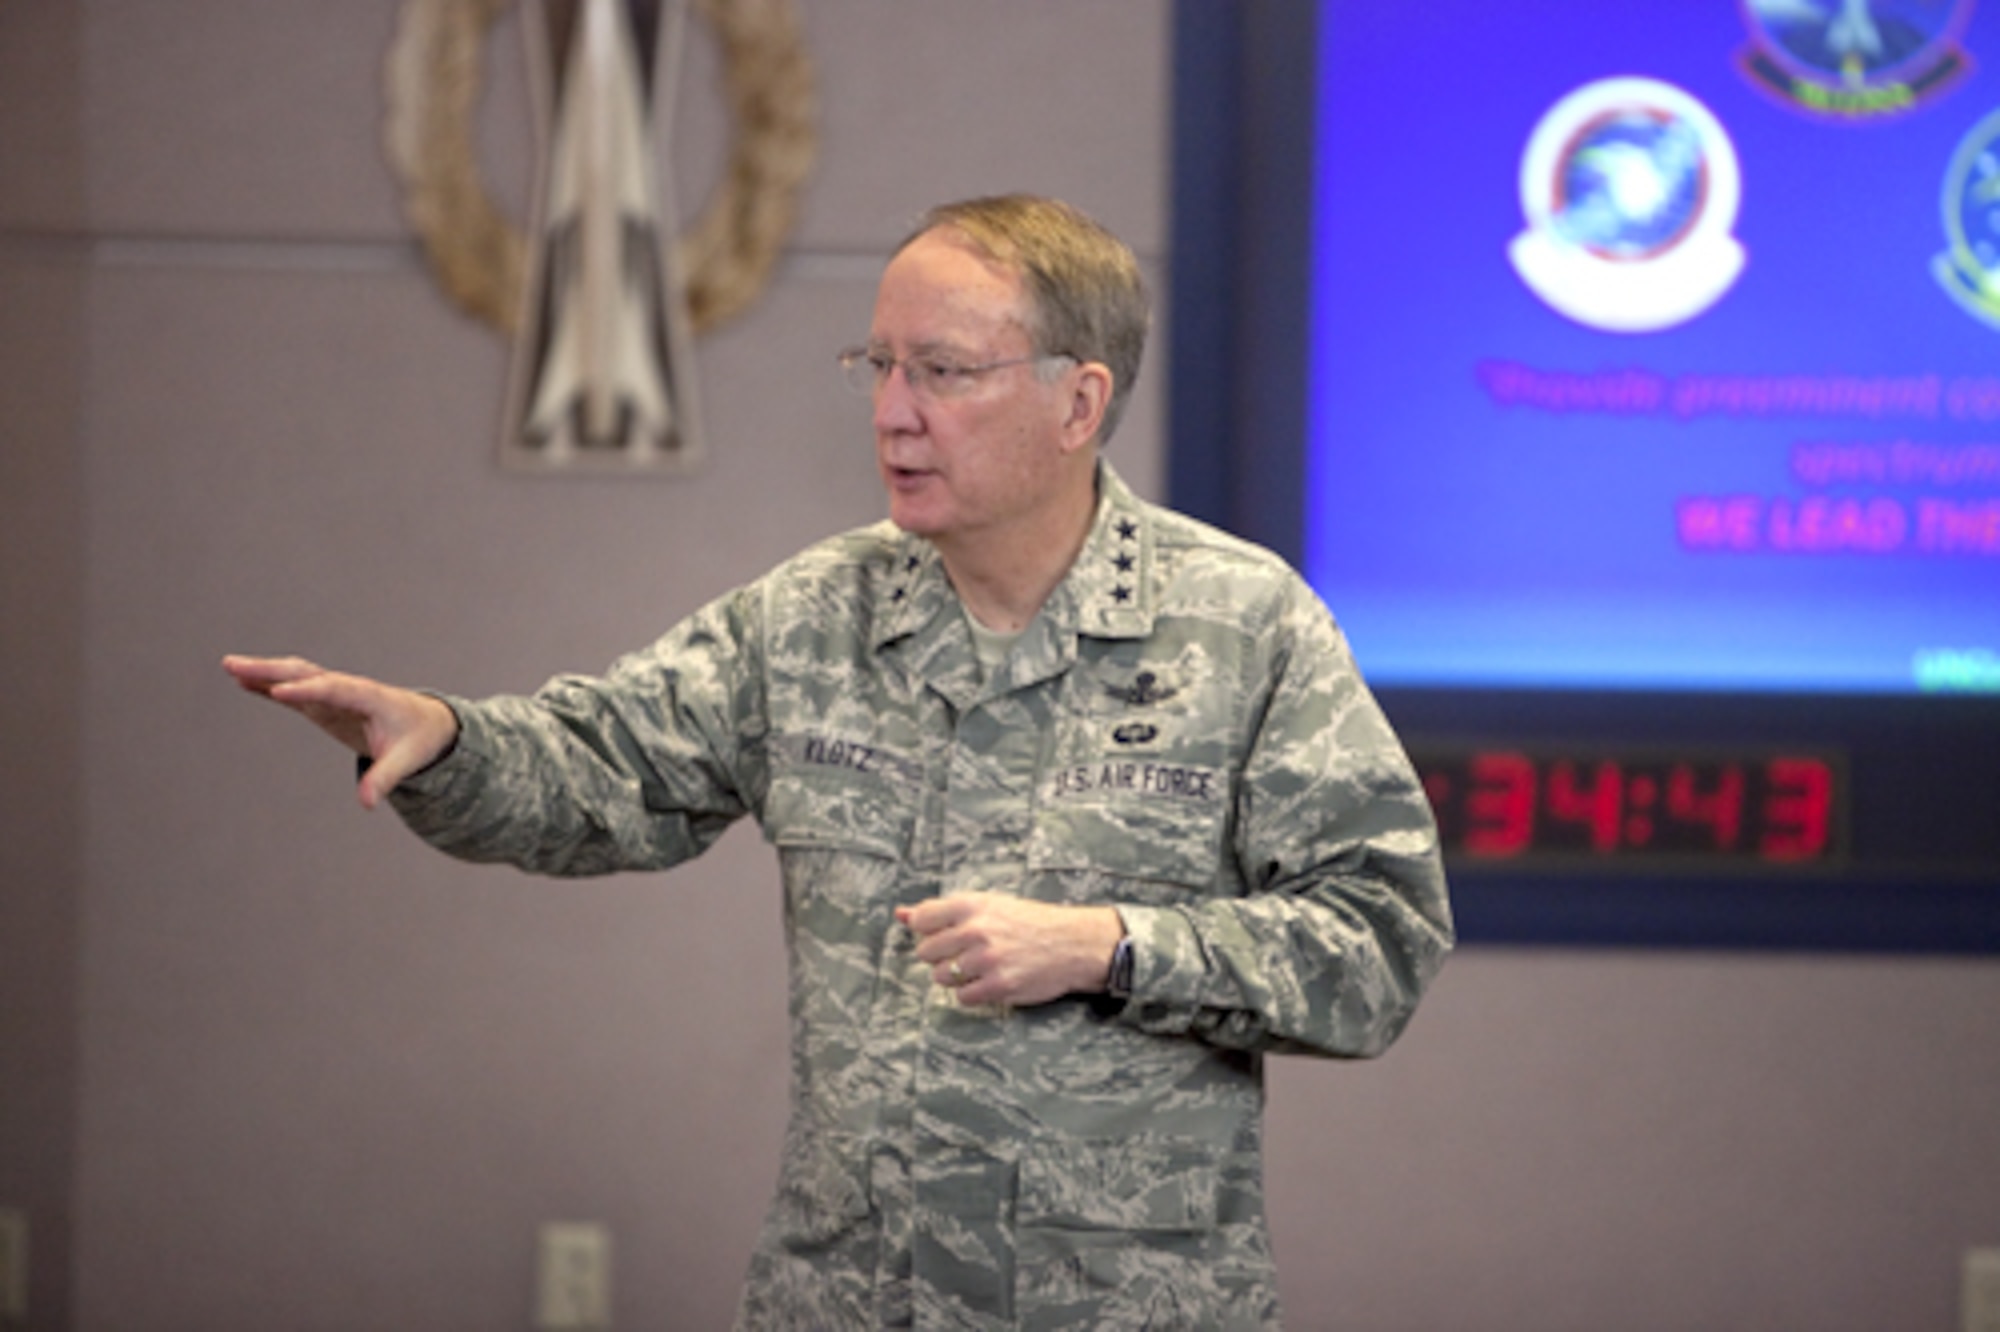 F.E. WARREN AIR FORCE BASE, Wy. -- Lt. Gen. Frank Klotz, Air Force Global Strike Command commander, addresses the men and women of the 90th Operations Group, F.E. Warren AFB, Wyo., during their pre-departure brief Tuesday.  General Klotz met with installation leadership, community leaders and Airmen during visits to Warren; Malmstrom AFB, Mont.; and Minot AFB N.D.; as AFGSC assumed responsibility for the ICBM mission Tuesday.